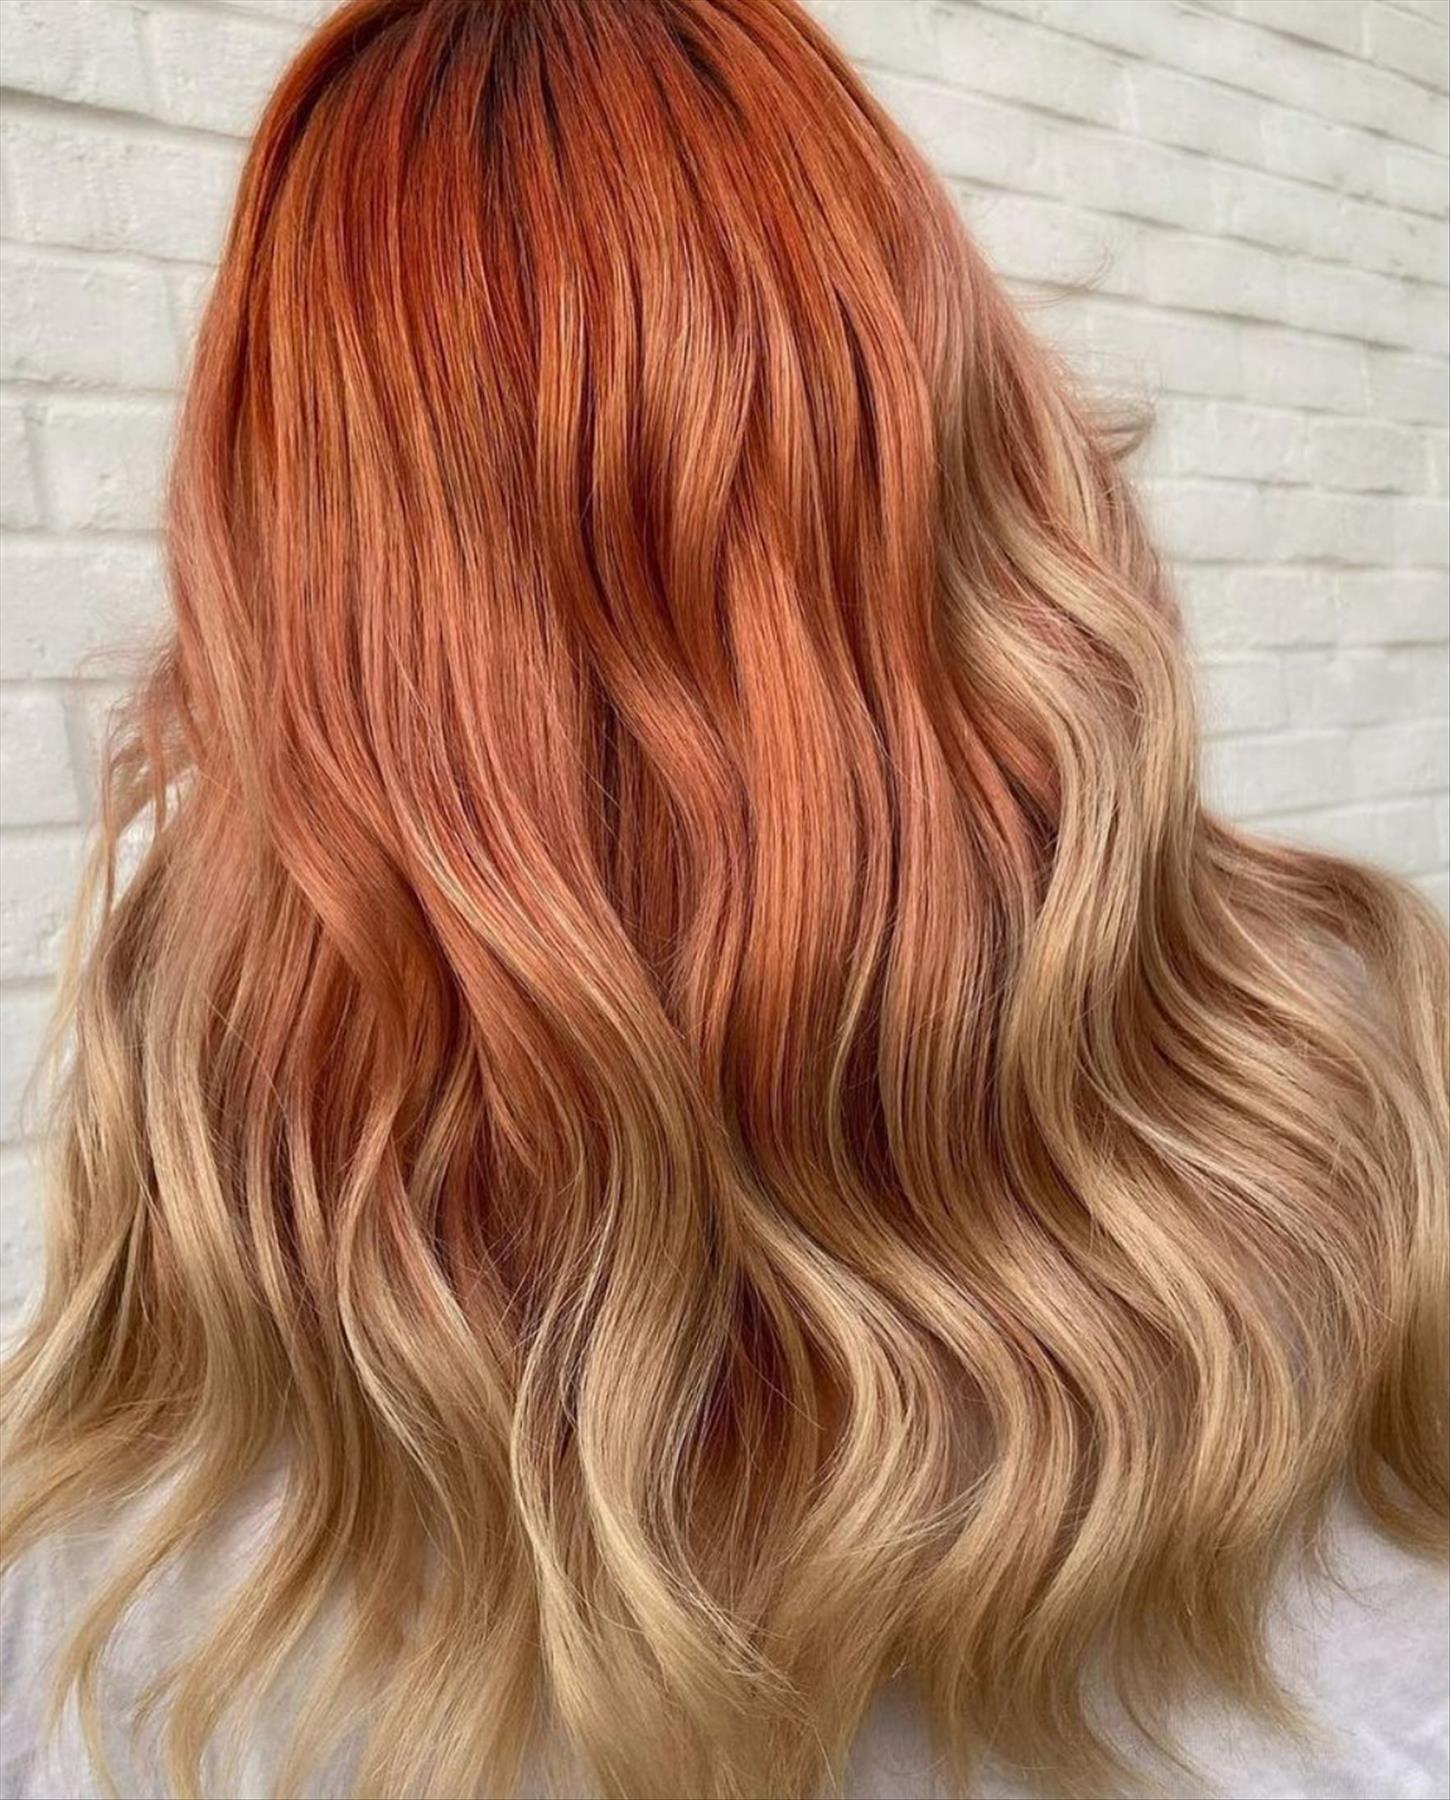 erfect two-color hair dye ideas and peekaboo highlight